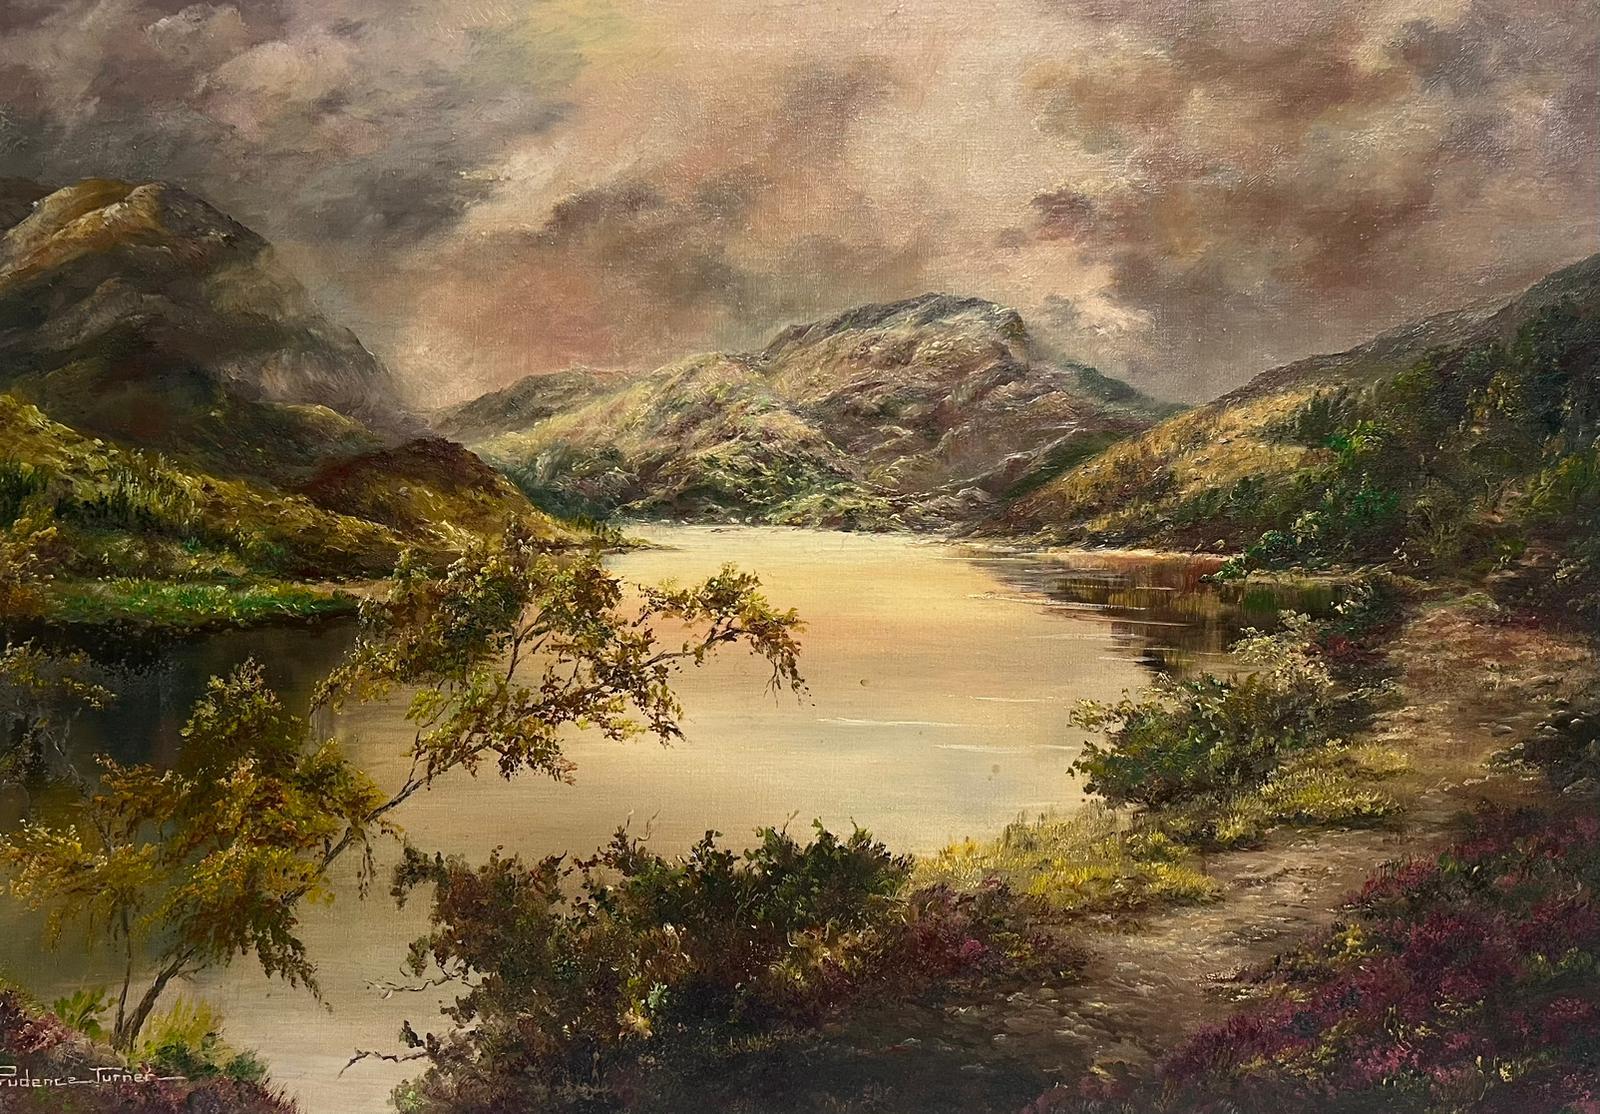 Prudence Turner Landscape Painting - Loch Lubnaig Scottish Highlands Loch Mountain Landscape Signed Oil Painting 